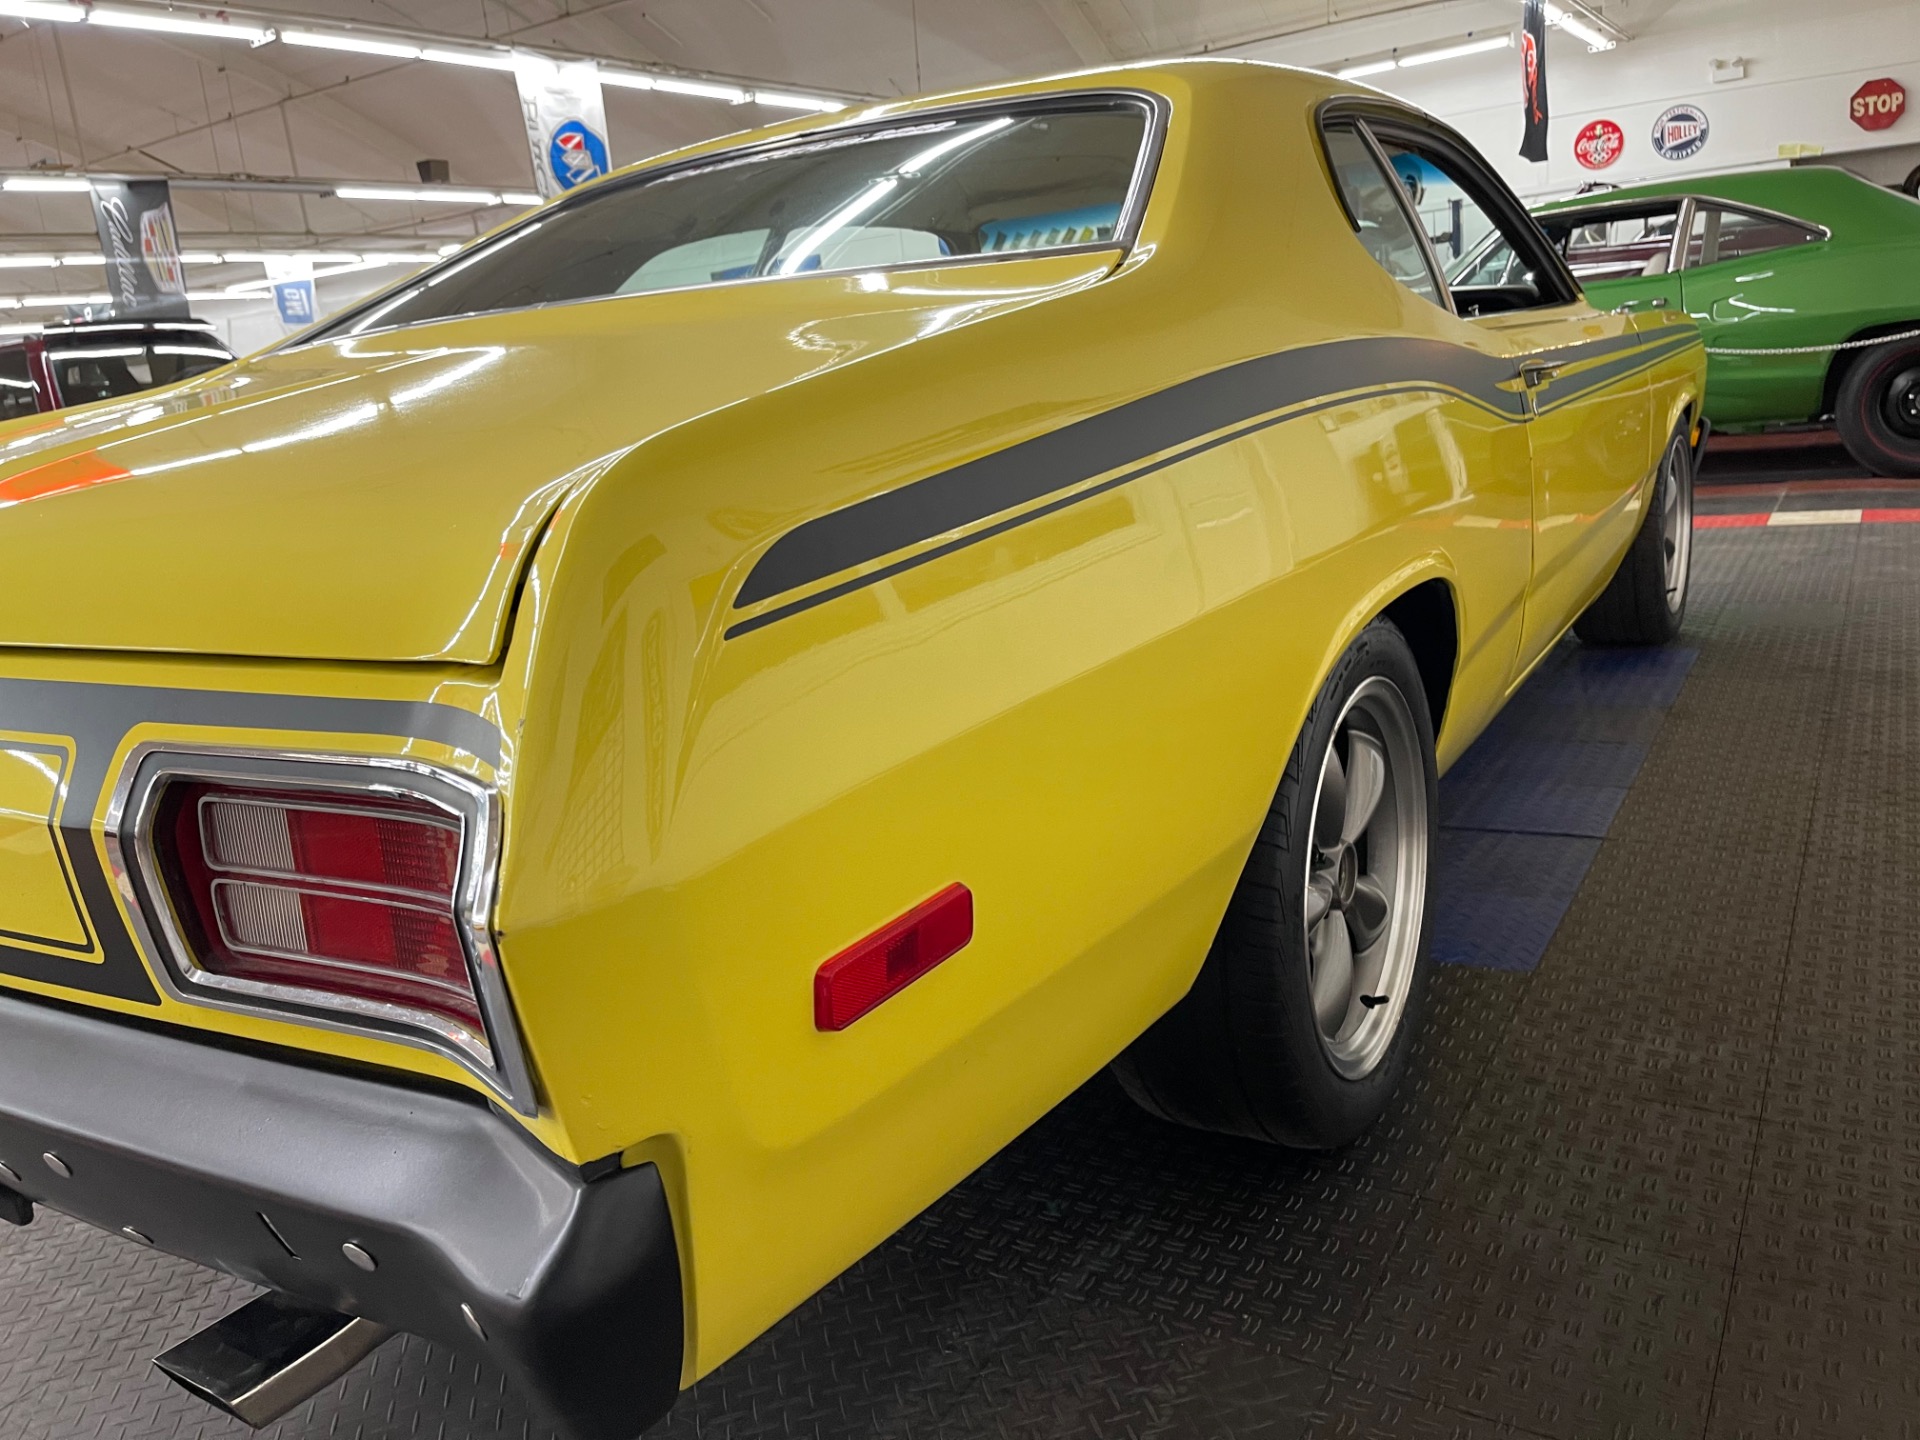 Used 1973 Plymouth Duster - 4 SPEED image